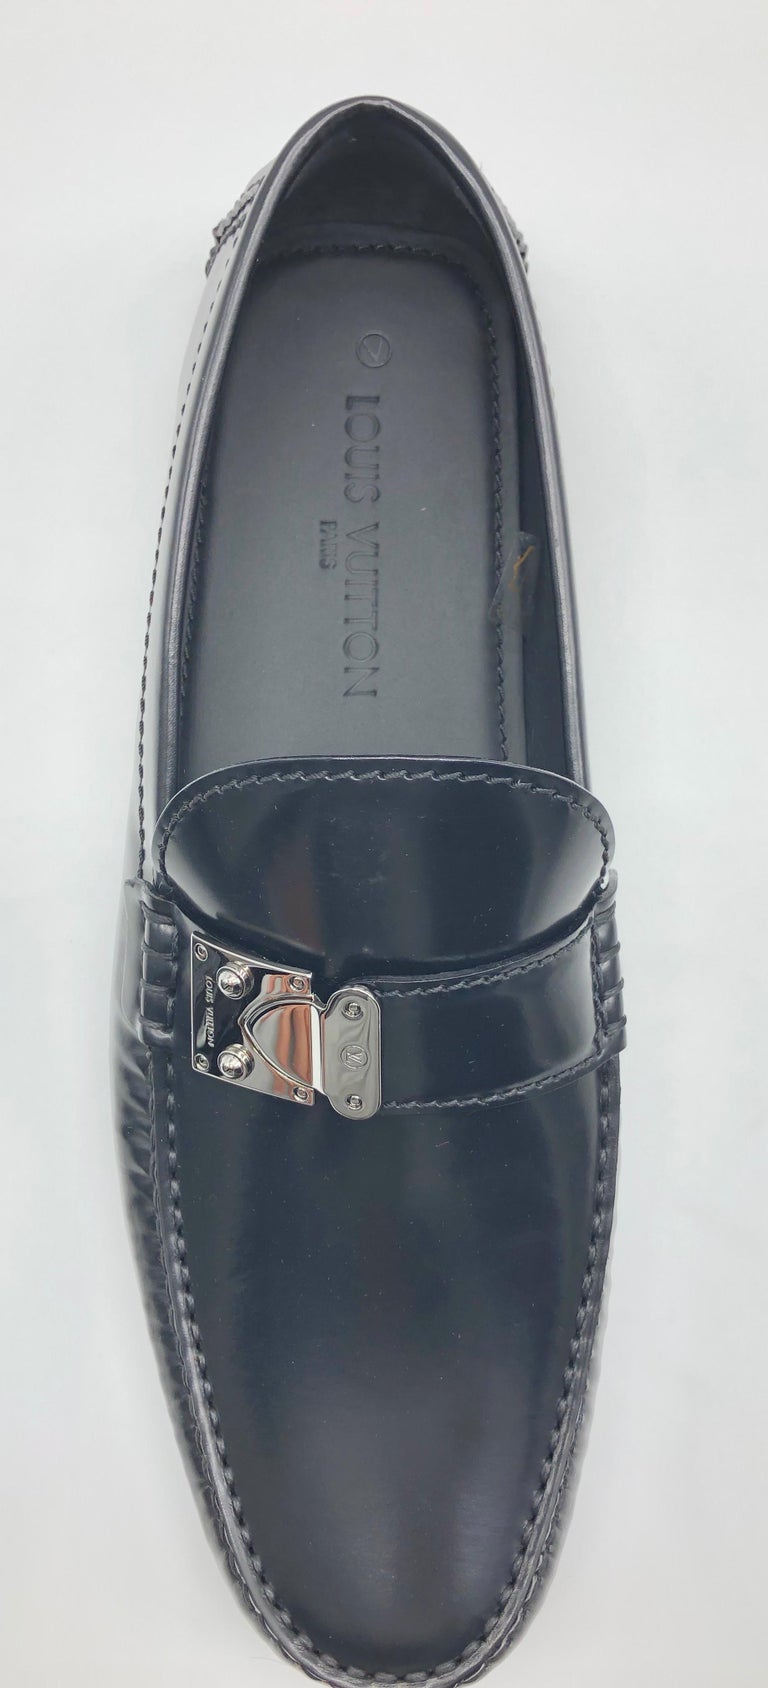 Louis Vuitton men Loafers in black leather // Model: RaceTrack car shoe //  New! at 1stDibs